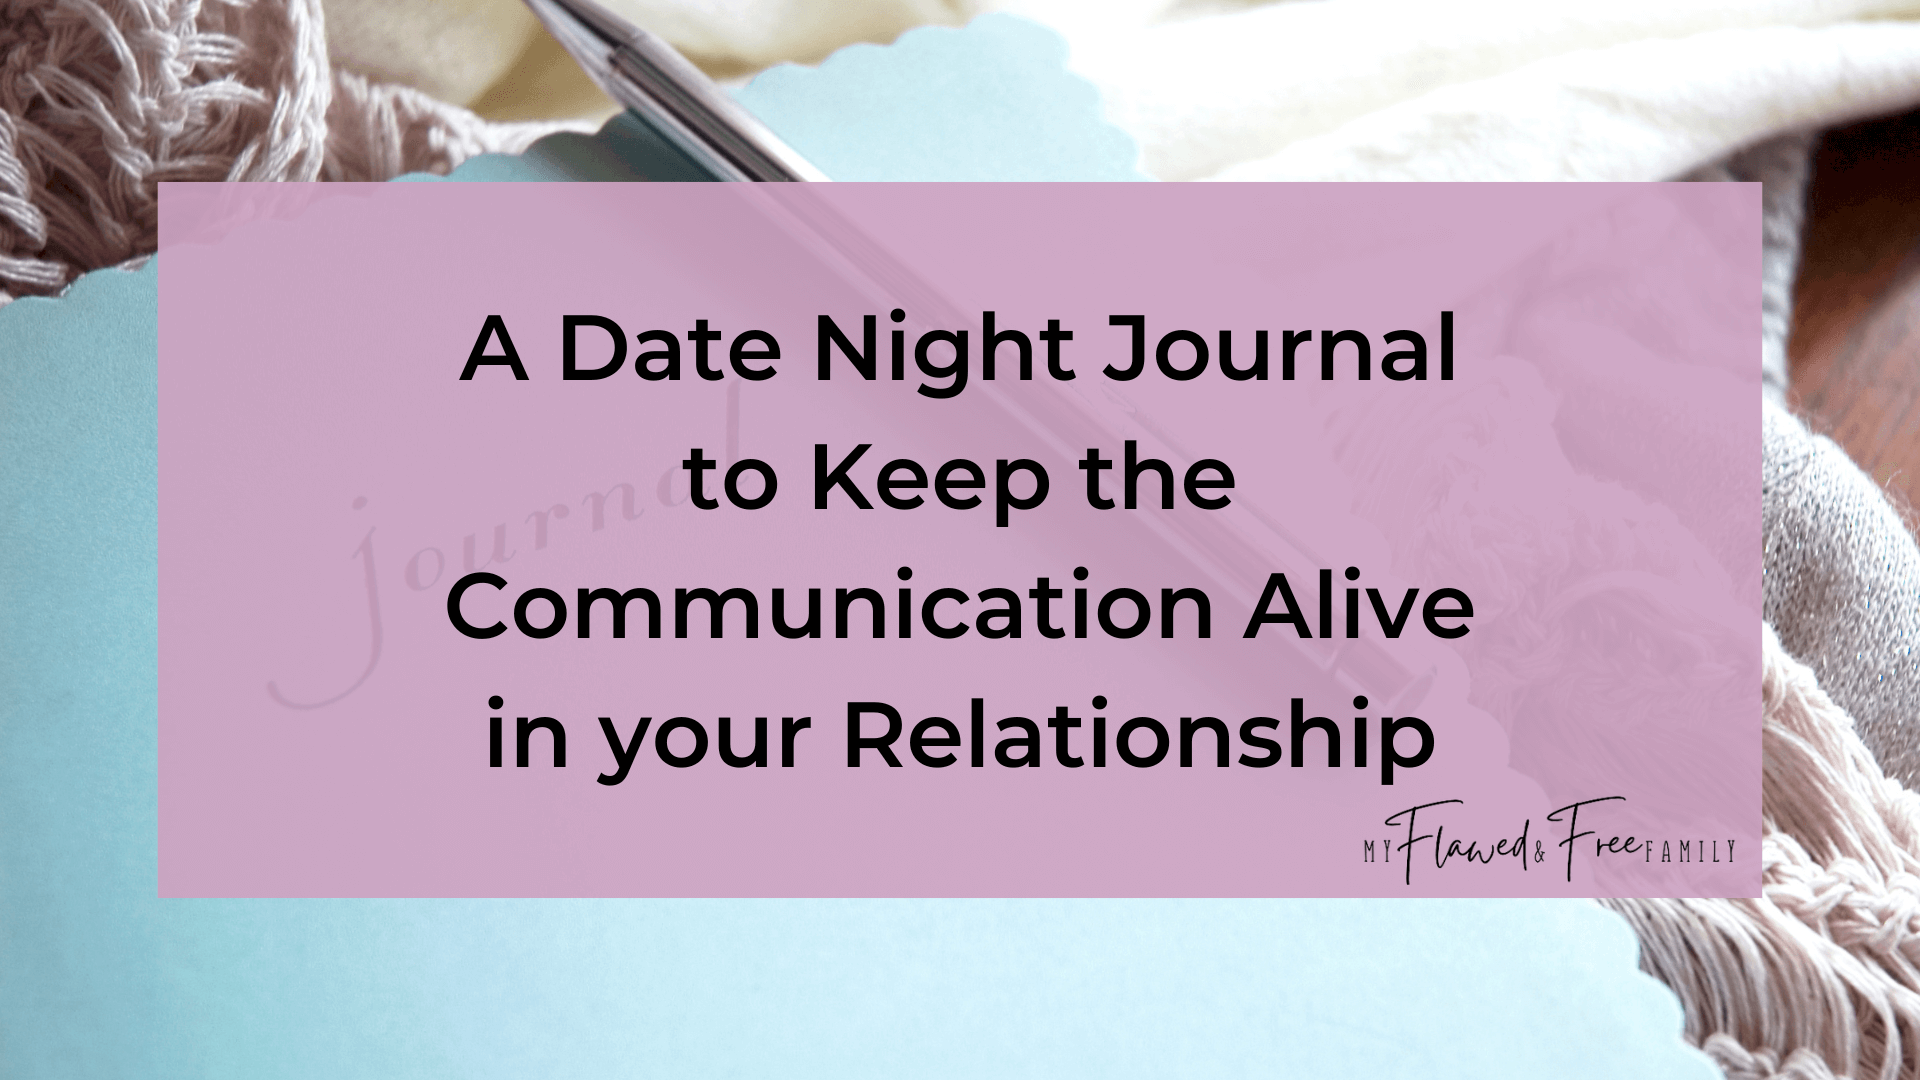 journal with title "A Date Night Journal to Keep the Communication Alive in your Relationship"